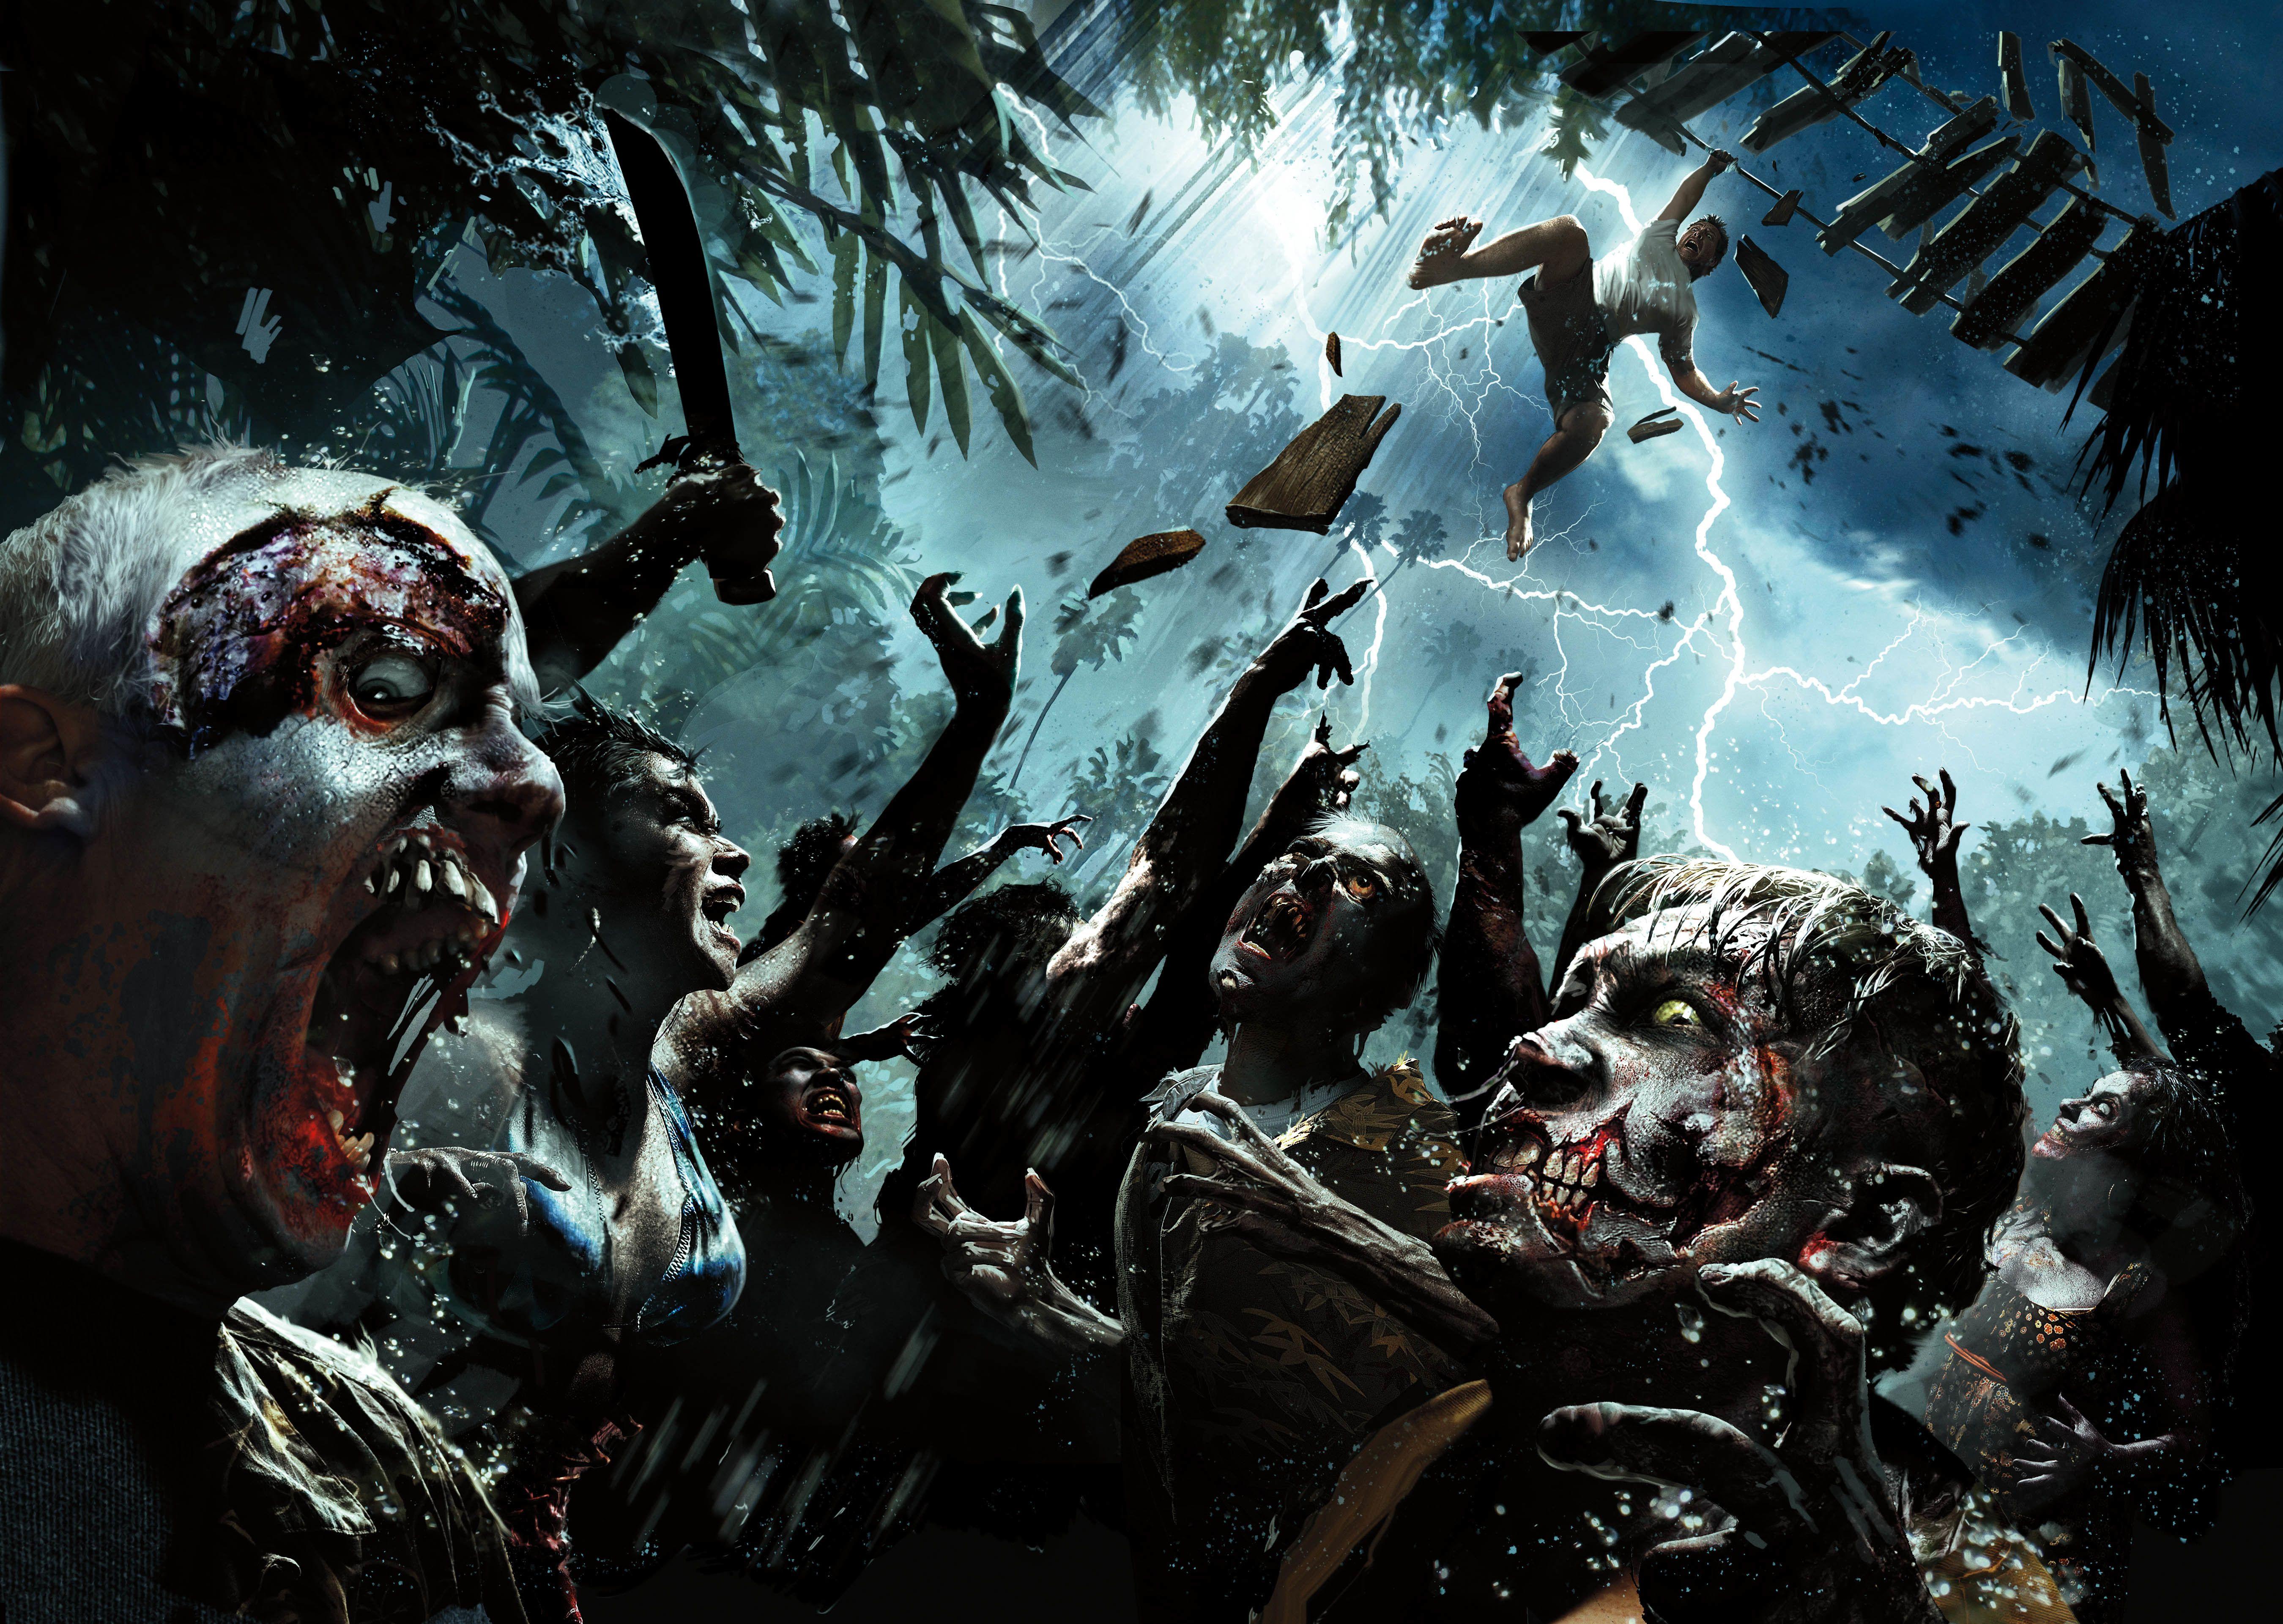 Free Zombie Wallpaper. Free Zombie Background and Image 49